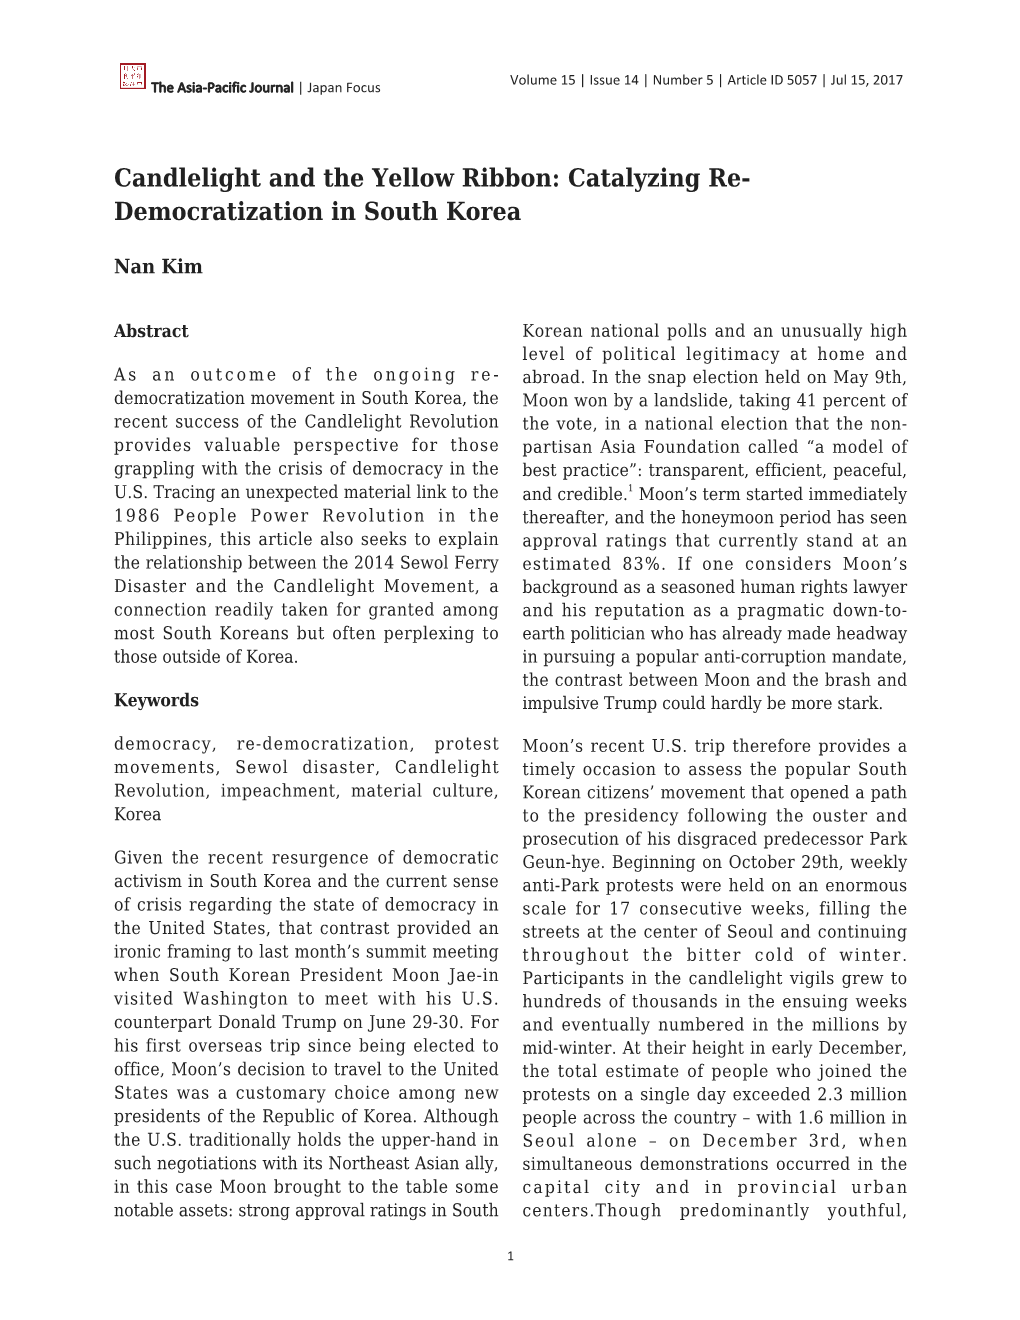 Candlelight and the Yellow Ribbon: Catalyzing Re- Democratization in South Korea